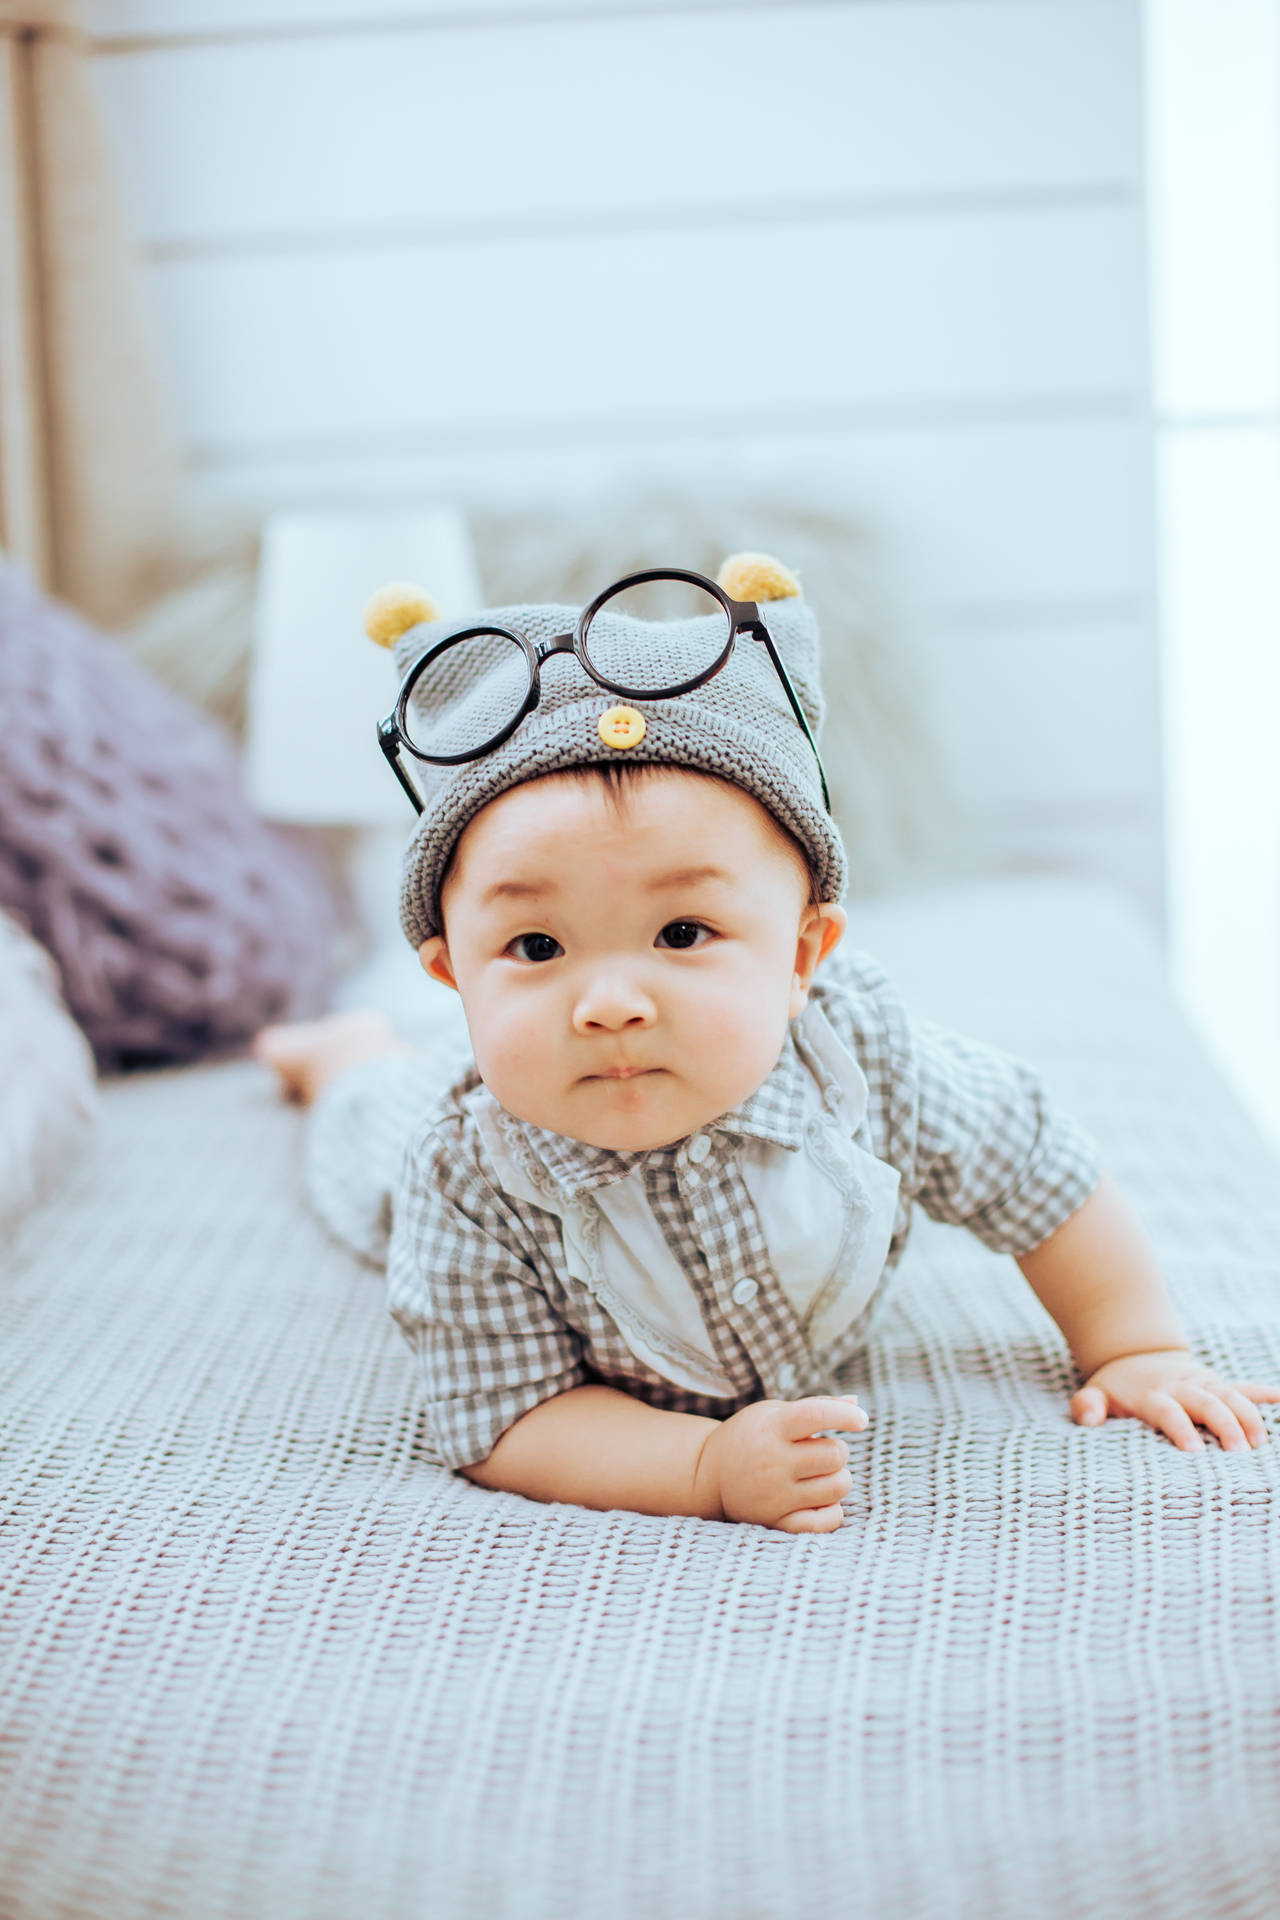 Cute Baby On Bed With Eyeglasses